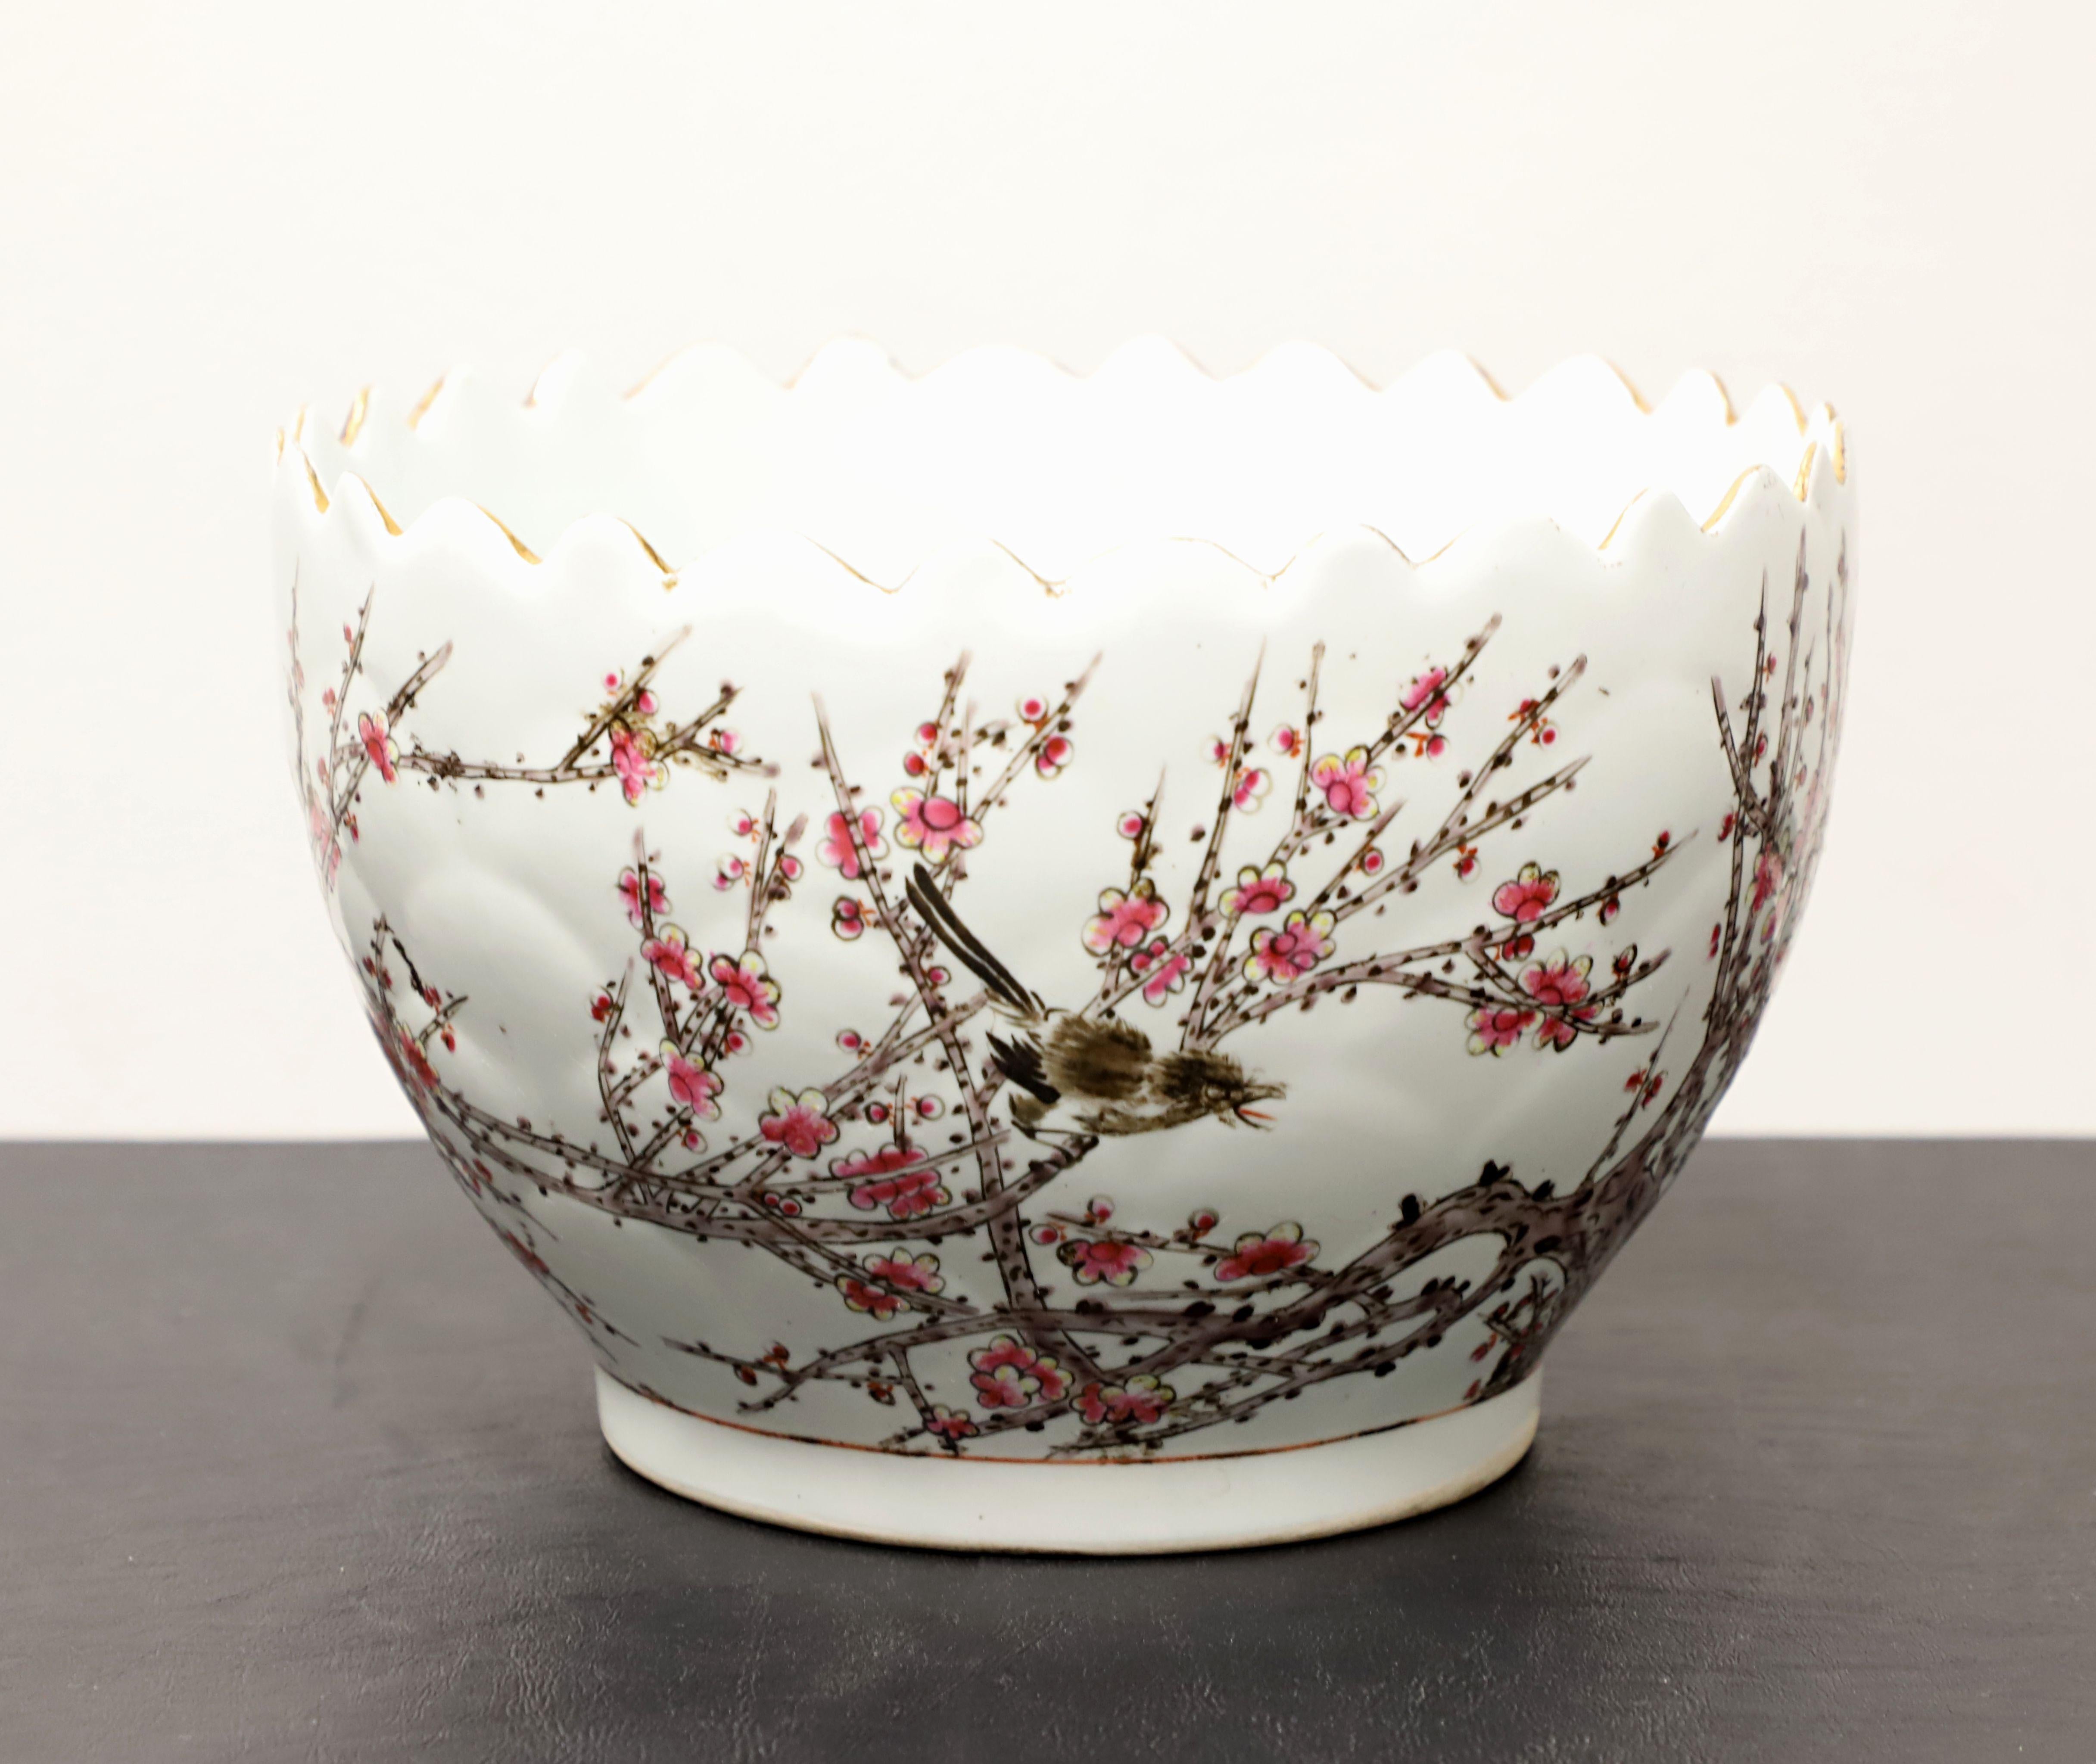 A Mid 20th Century Asian Chinese style decorative porcelain bowl, unbranded. A beautiful round porcelain bowl with a sawtooth cut edge, white color base, hand painted with cherry blossoms & birds in shades of pink, brown & black, gold accents, and